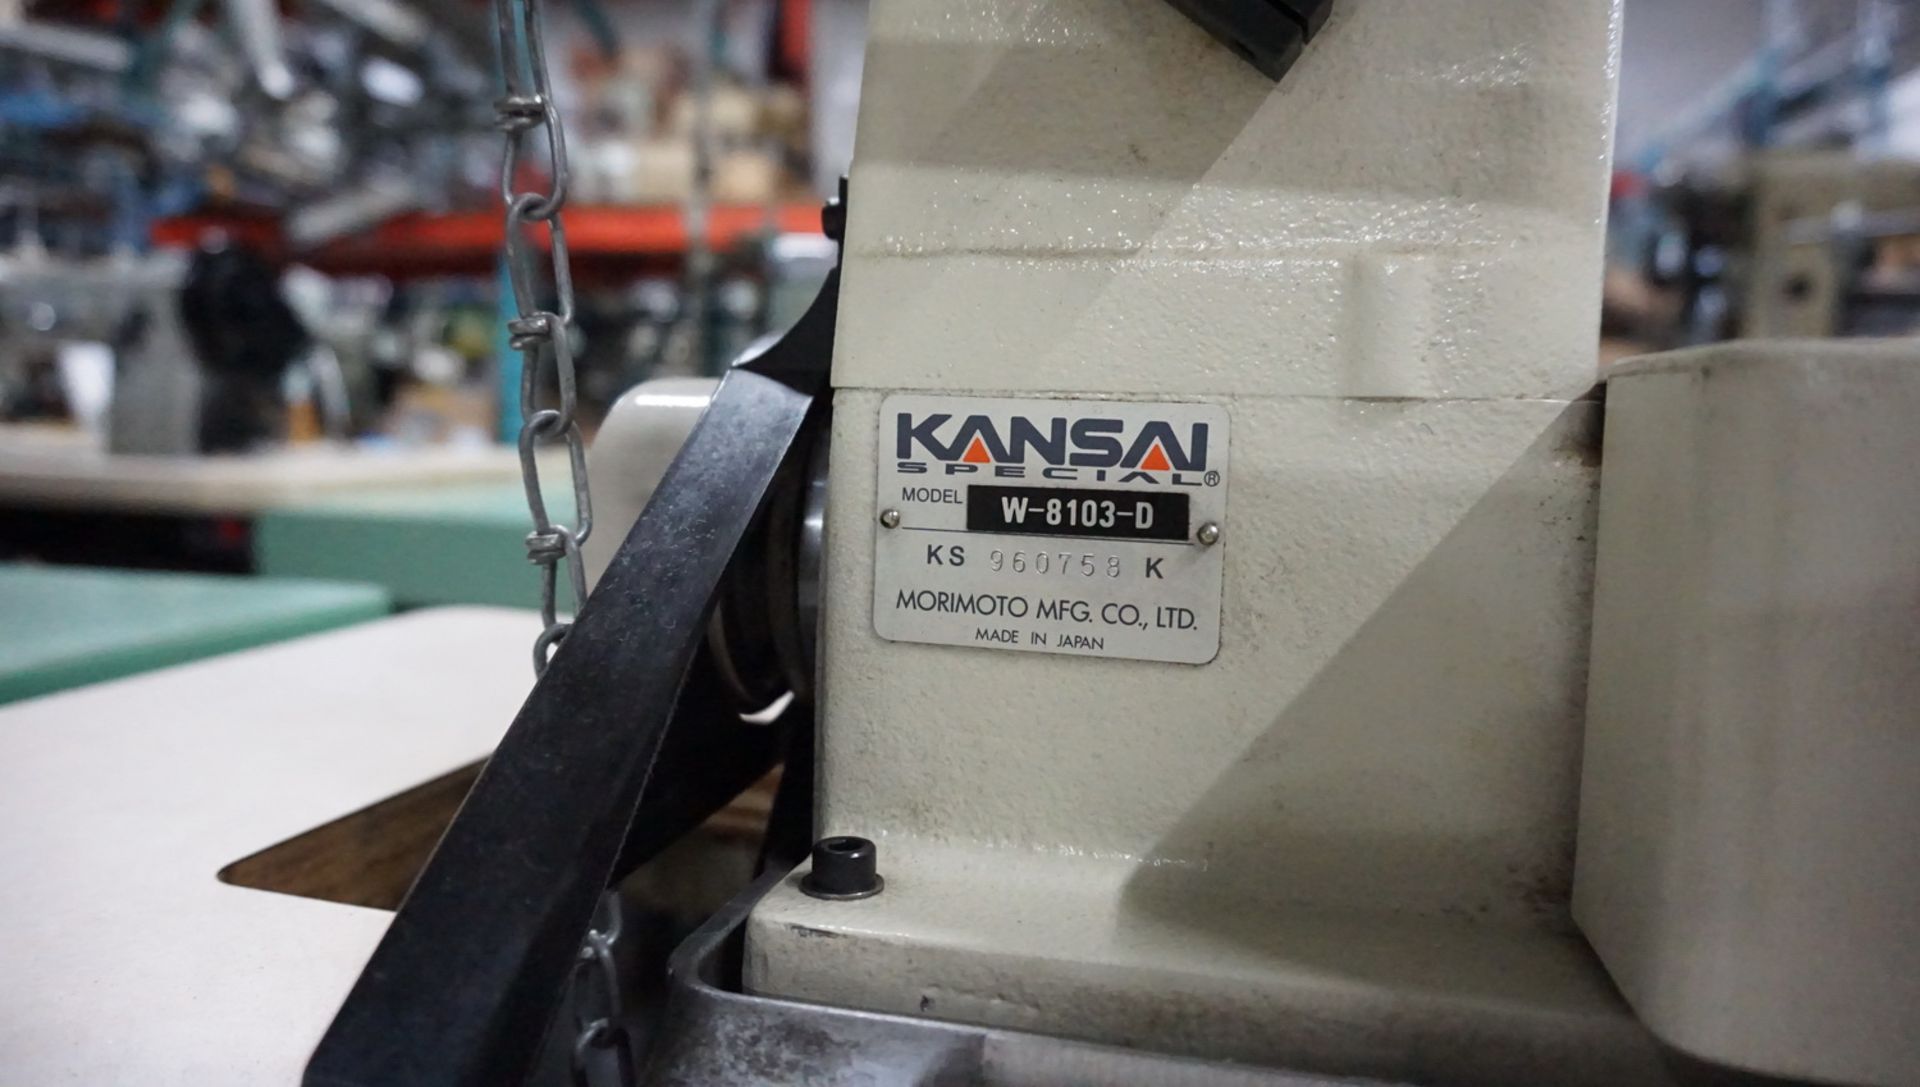 KANSAI W-8103-D 3-NEEDLE FLATBED COVERSTITCH, S/N 960758 - Image 5 of 5